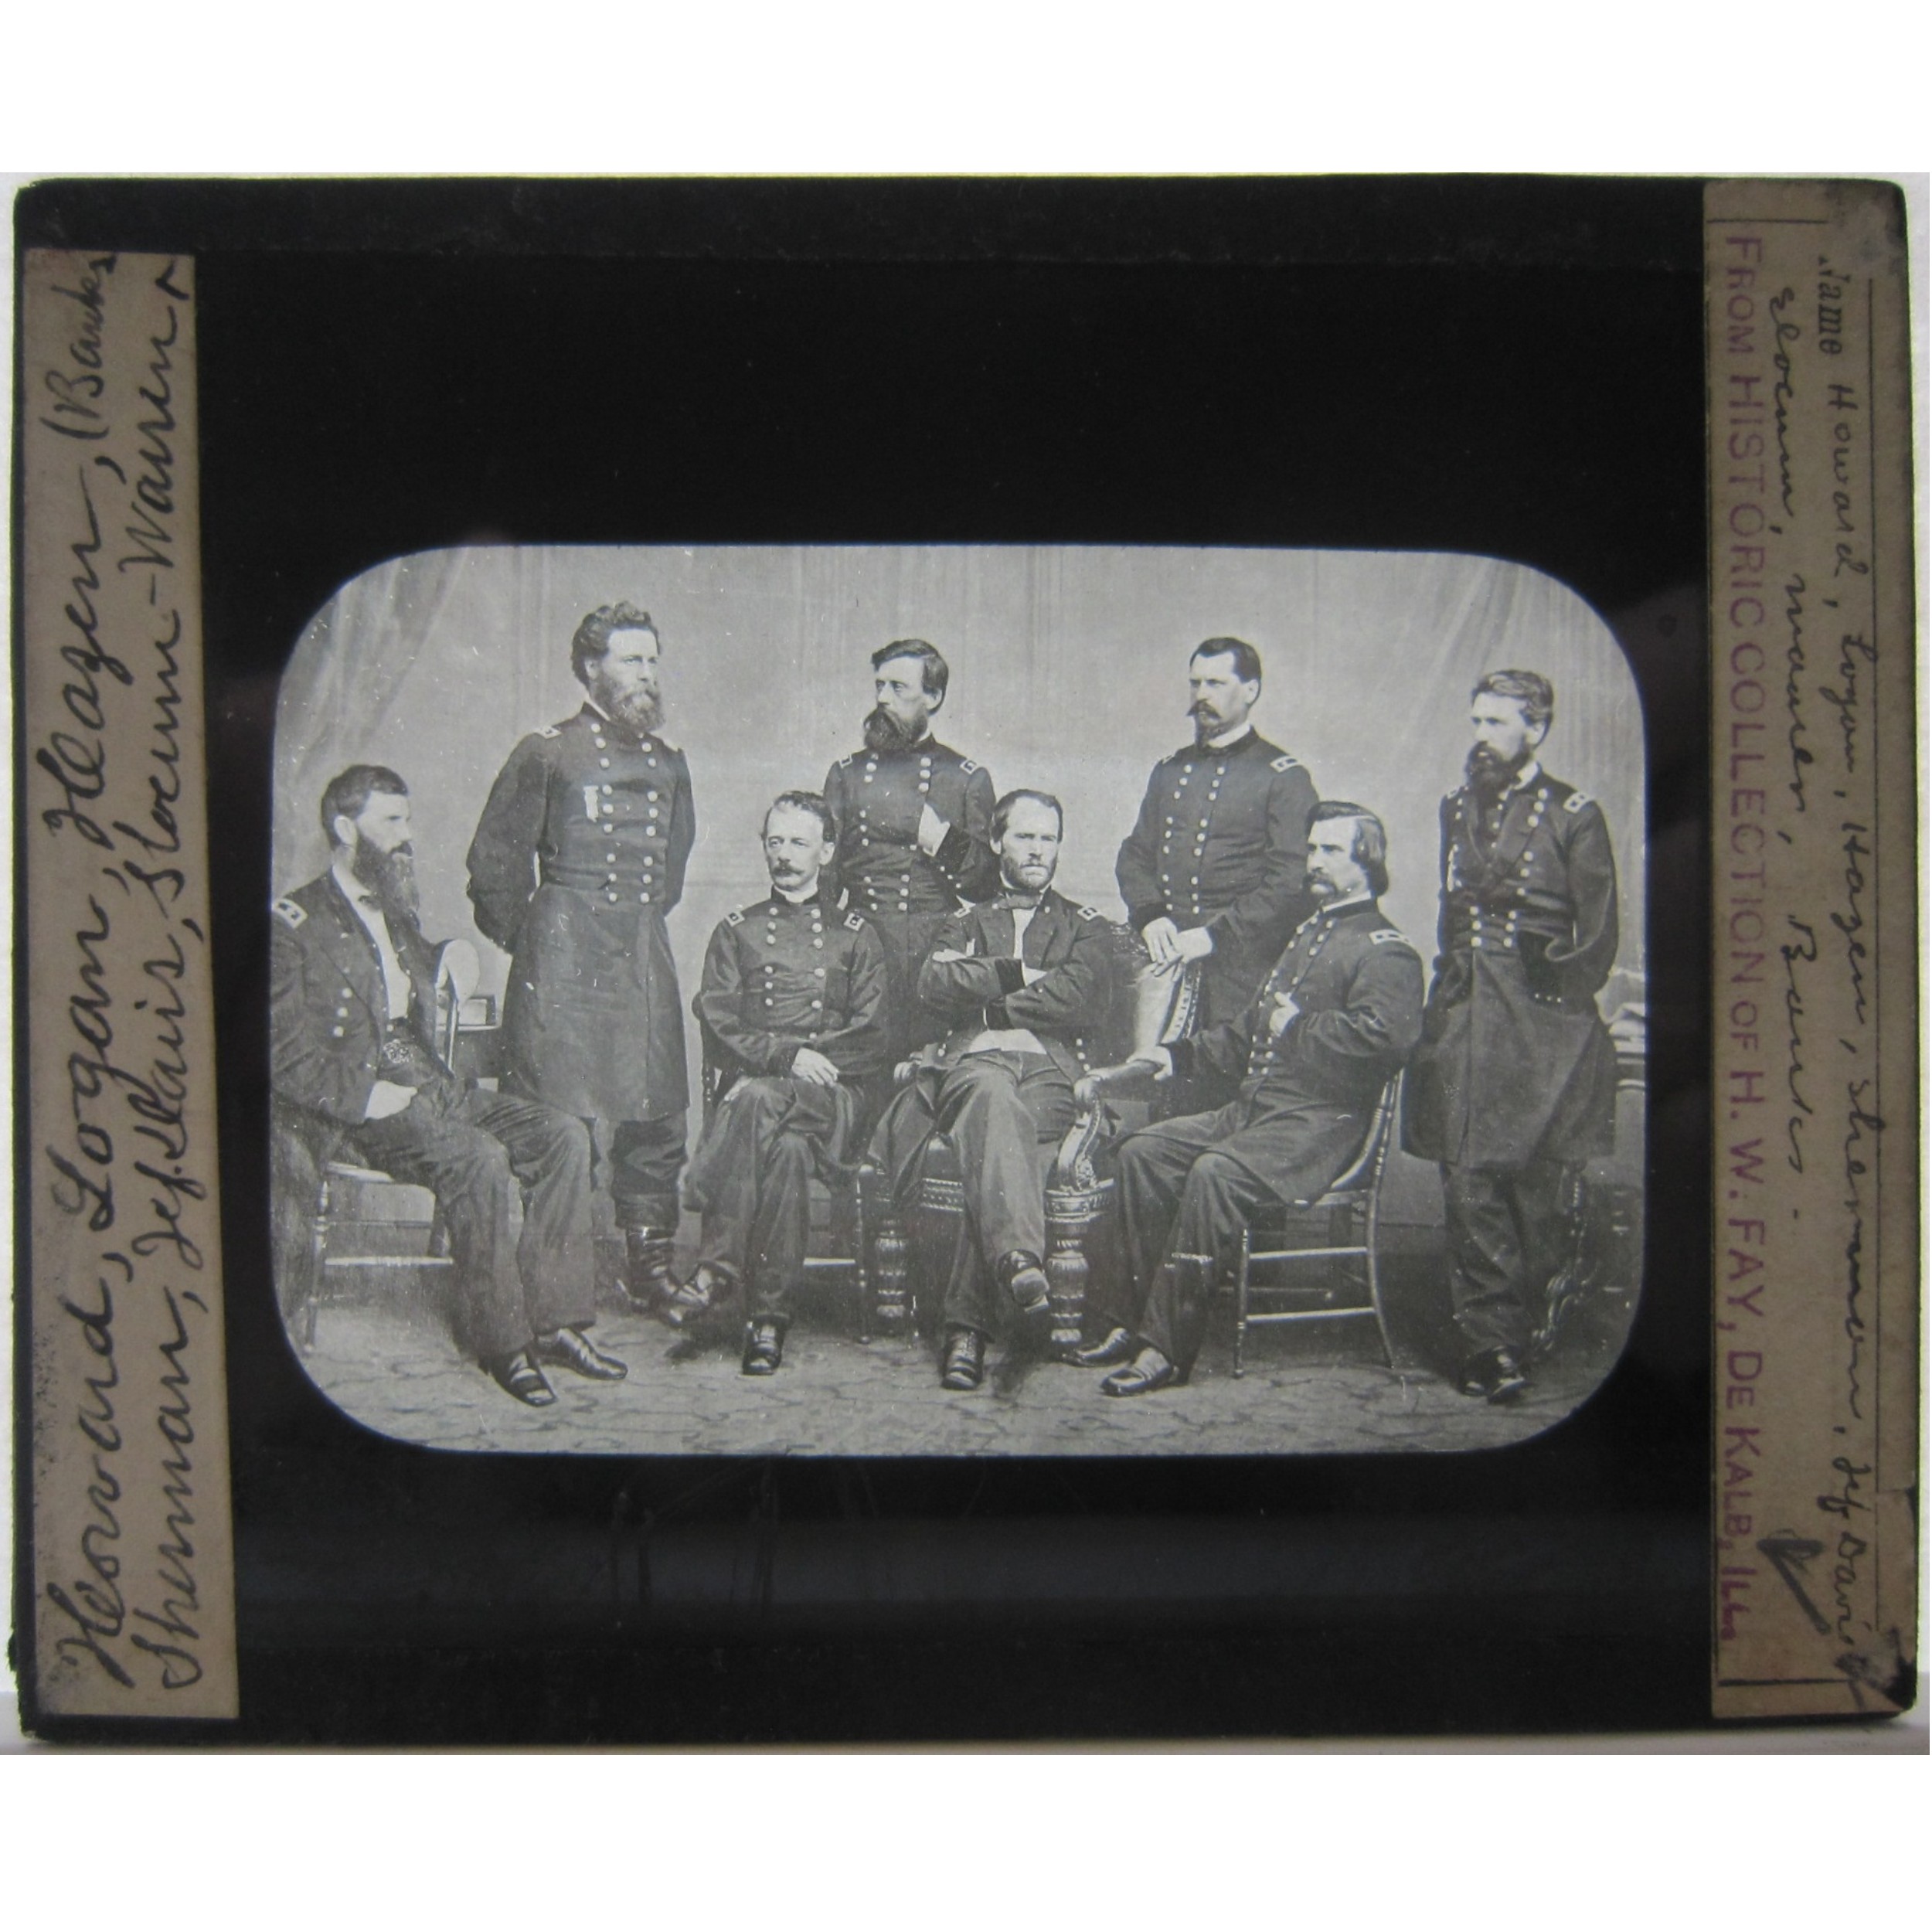 Glass slide of Major General William T. Sherman and his Generals